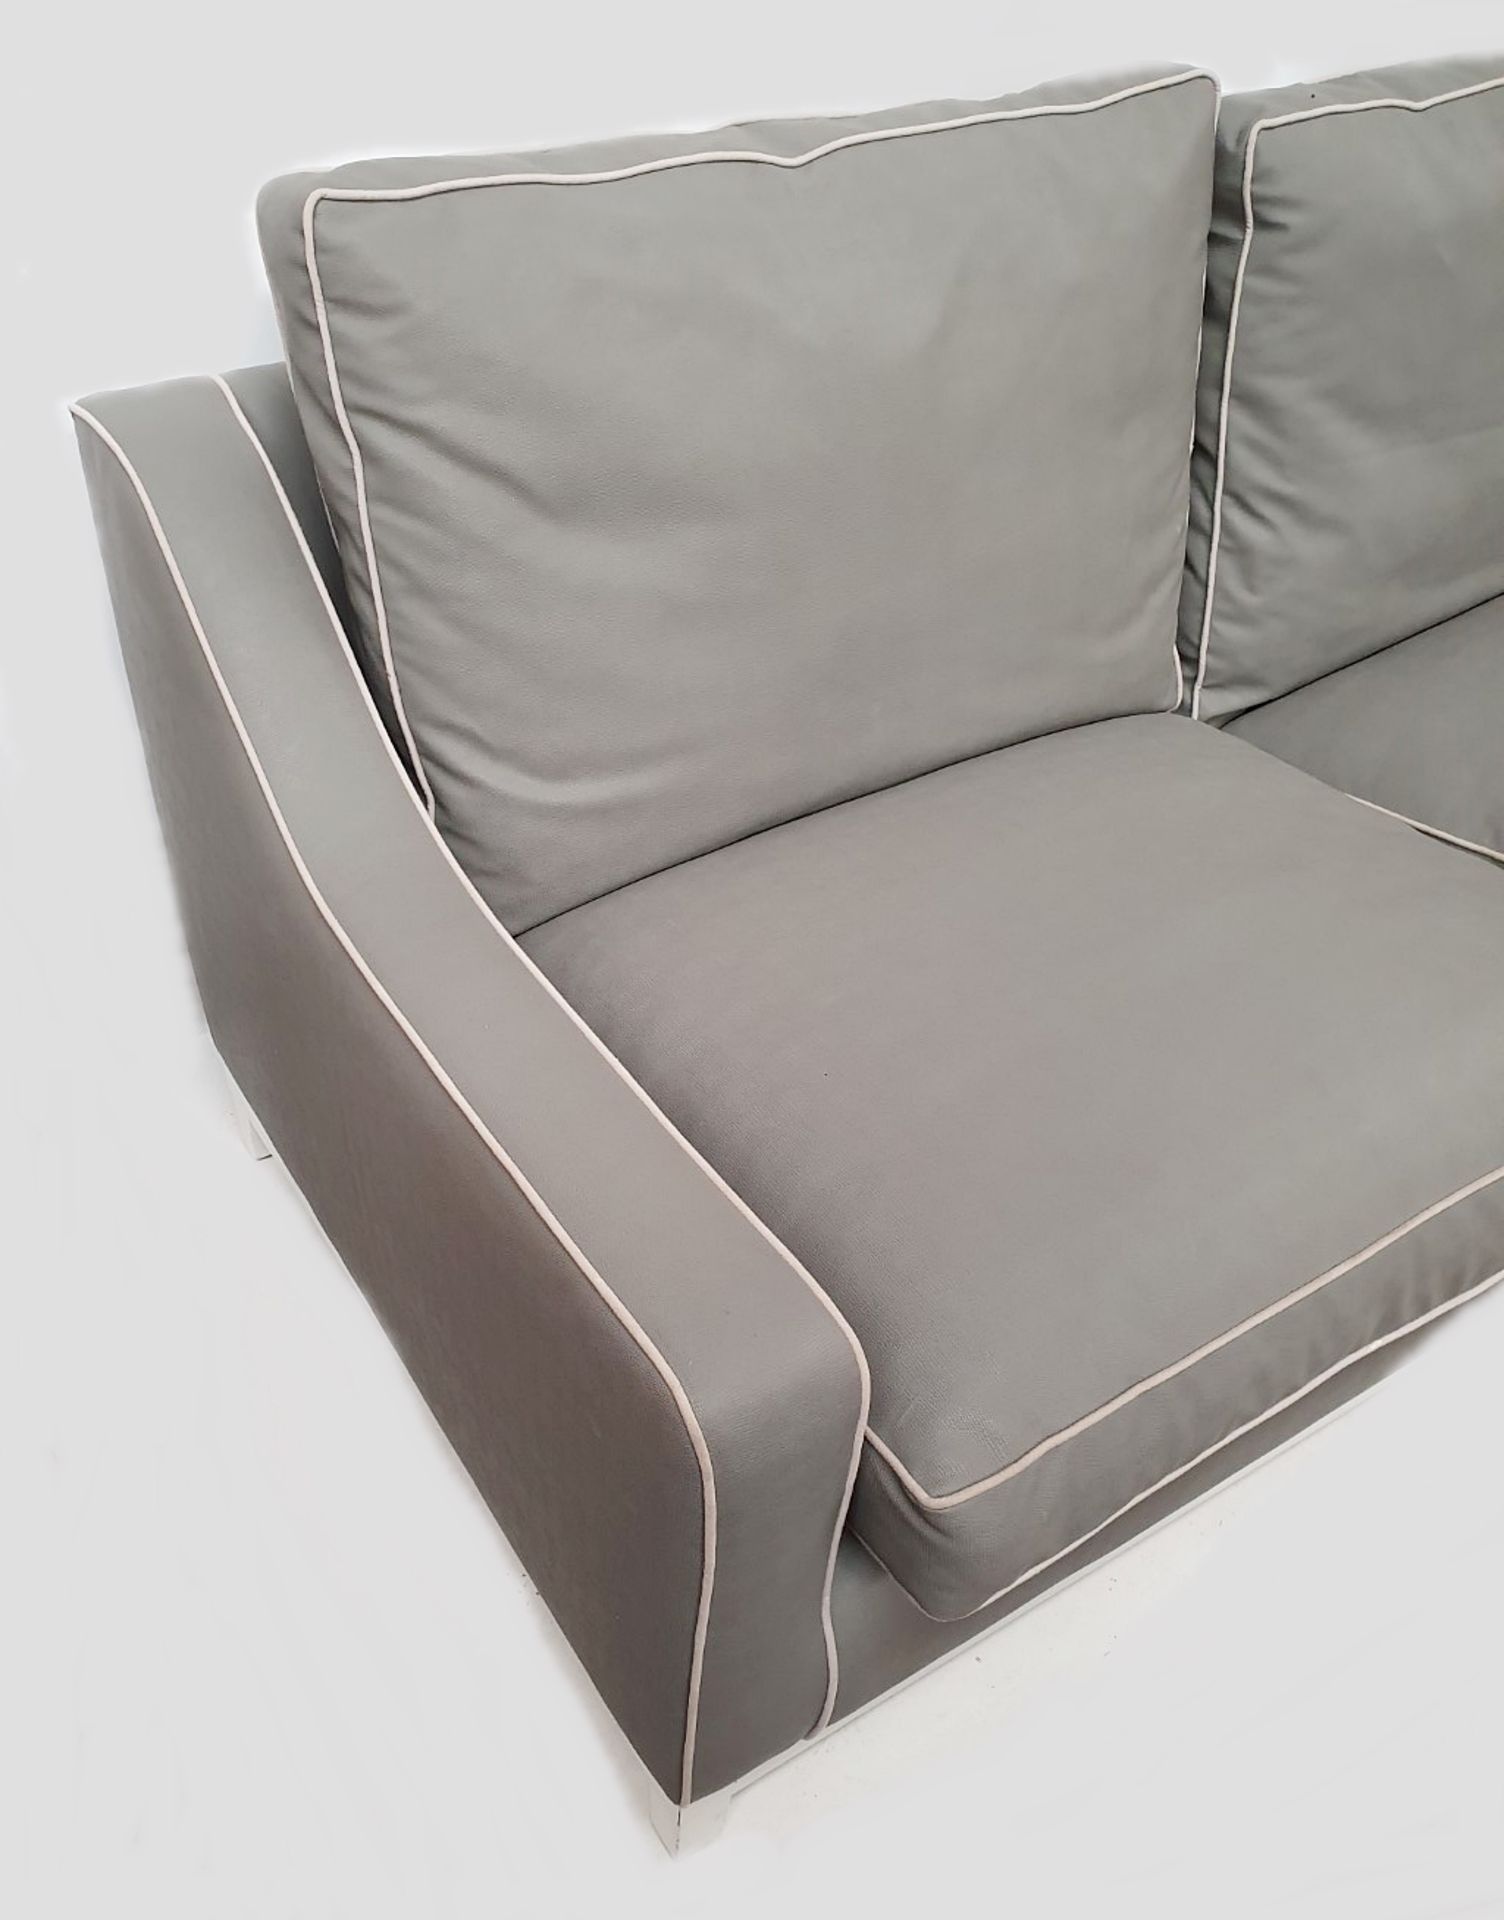 1 x Contemporary 2-Seater Grey Leather Sofa - CL380 - Ref: H581 - Location: Altrincham WA14 - NO VAT - Image 12 of 14